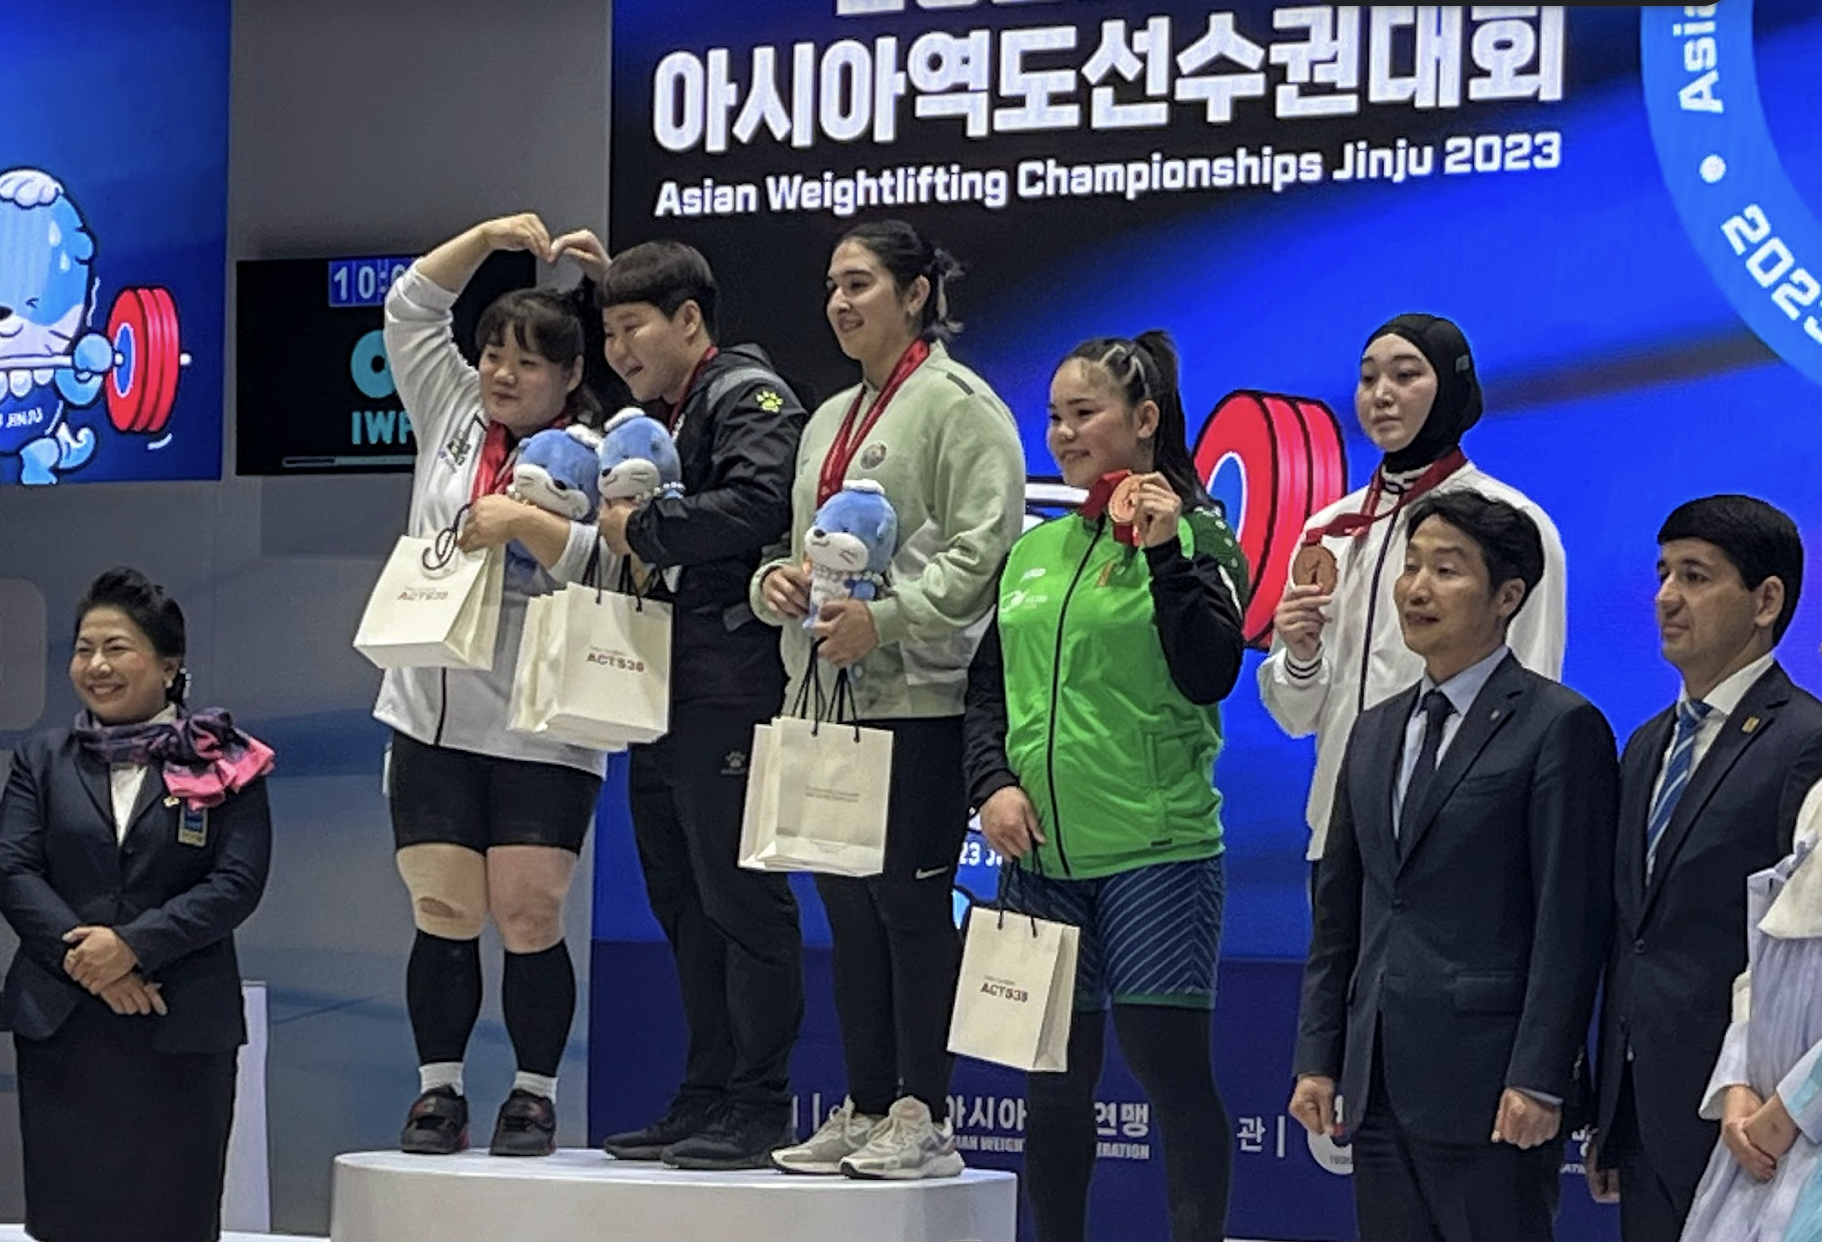 The podium for the women's 87kg category in Jinju ©Brian Oliver